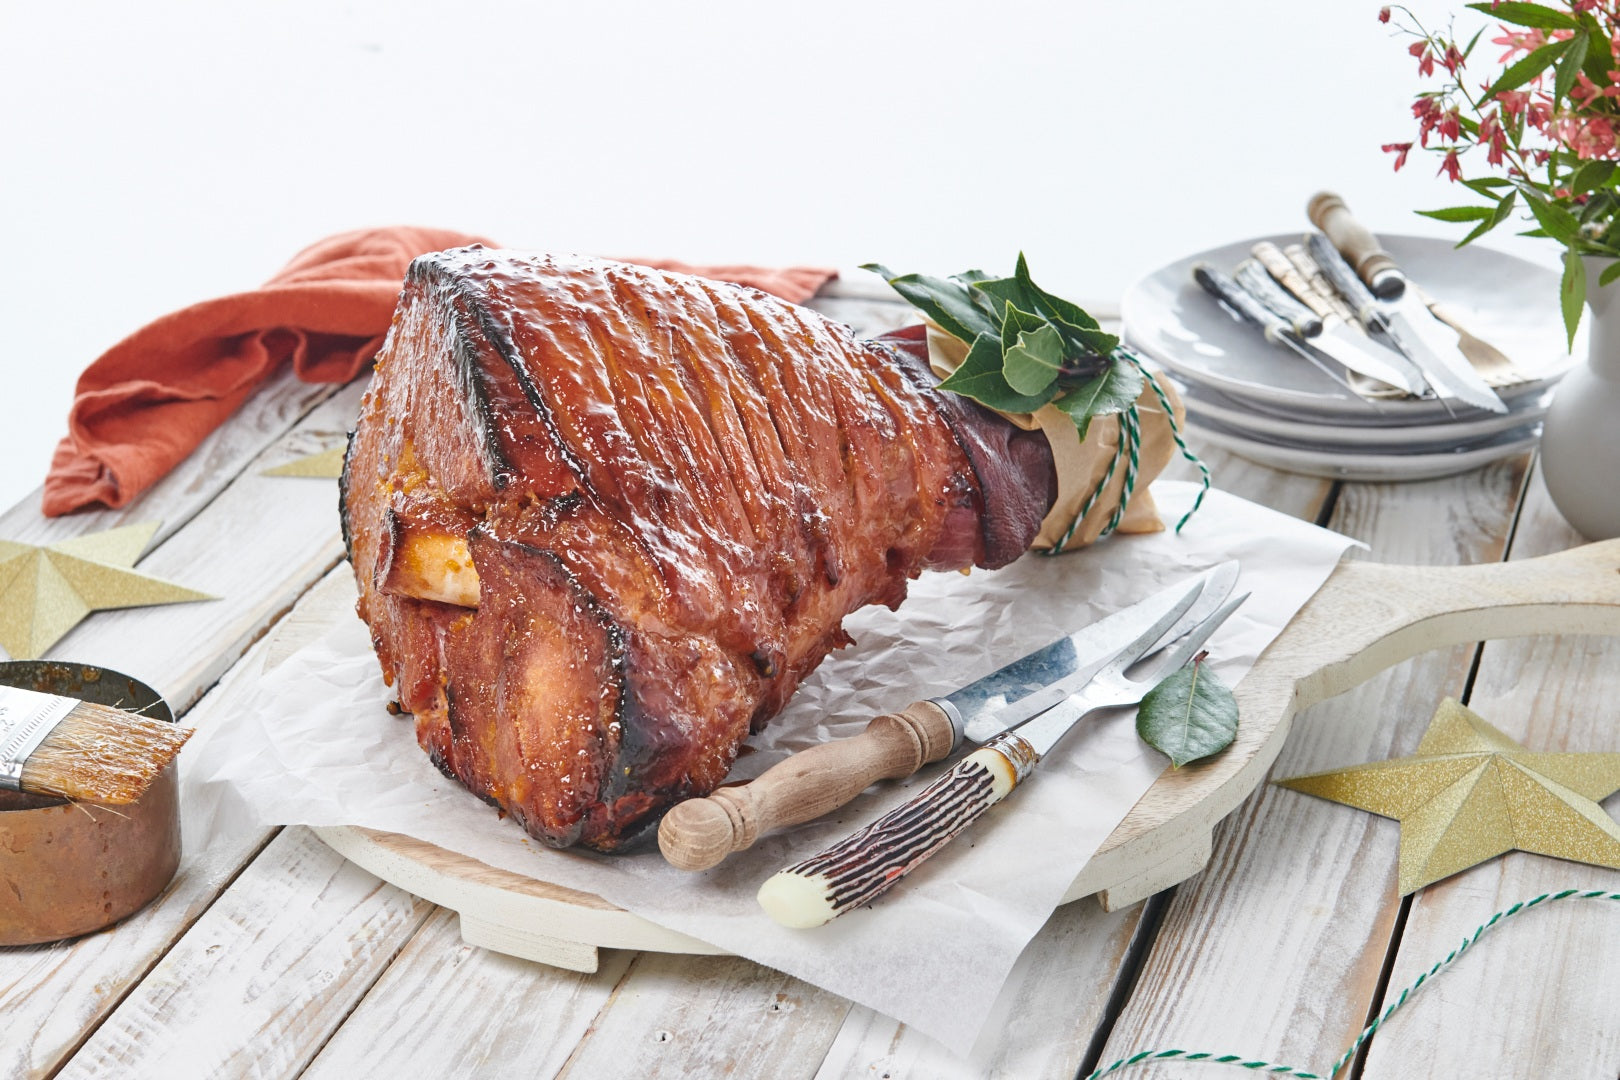 A scored, glazed and baked Christmas Ham on a board ready to be sliced and served